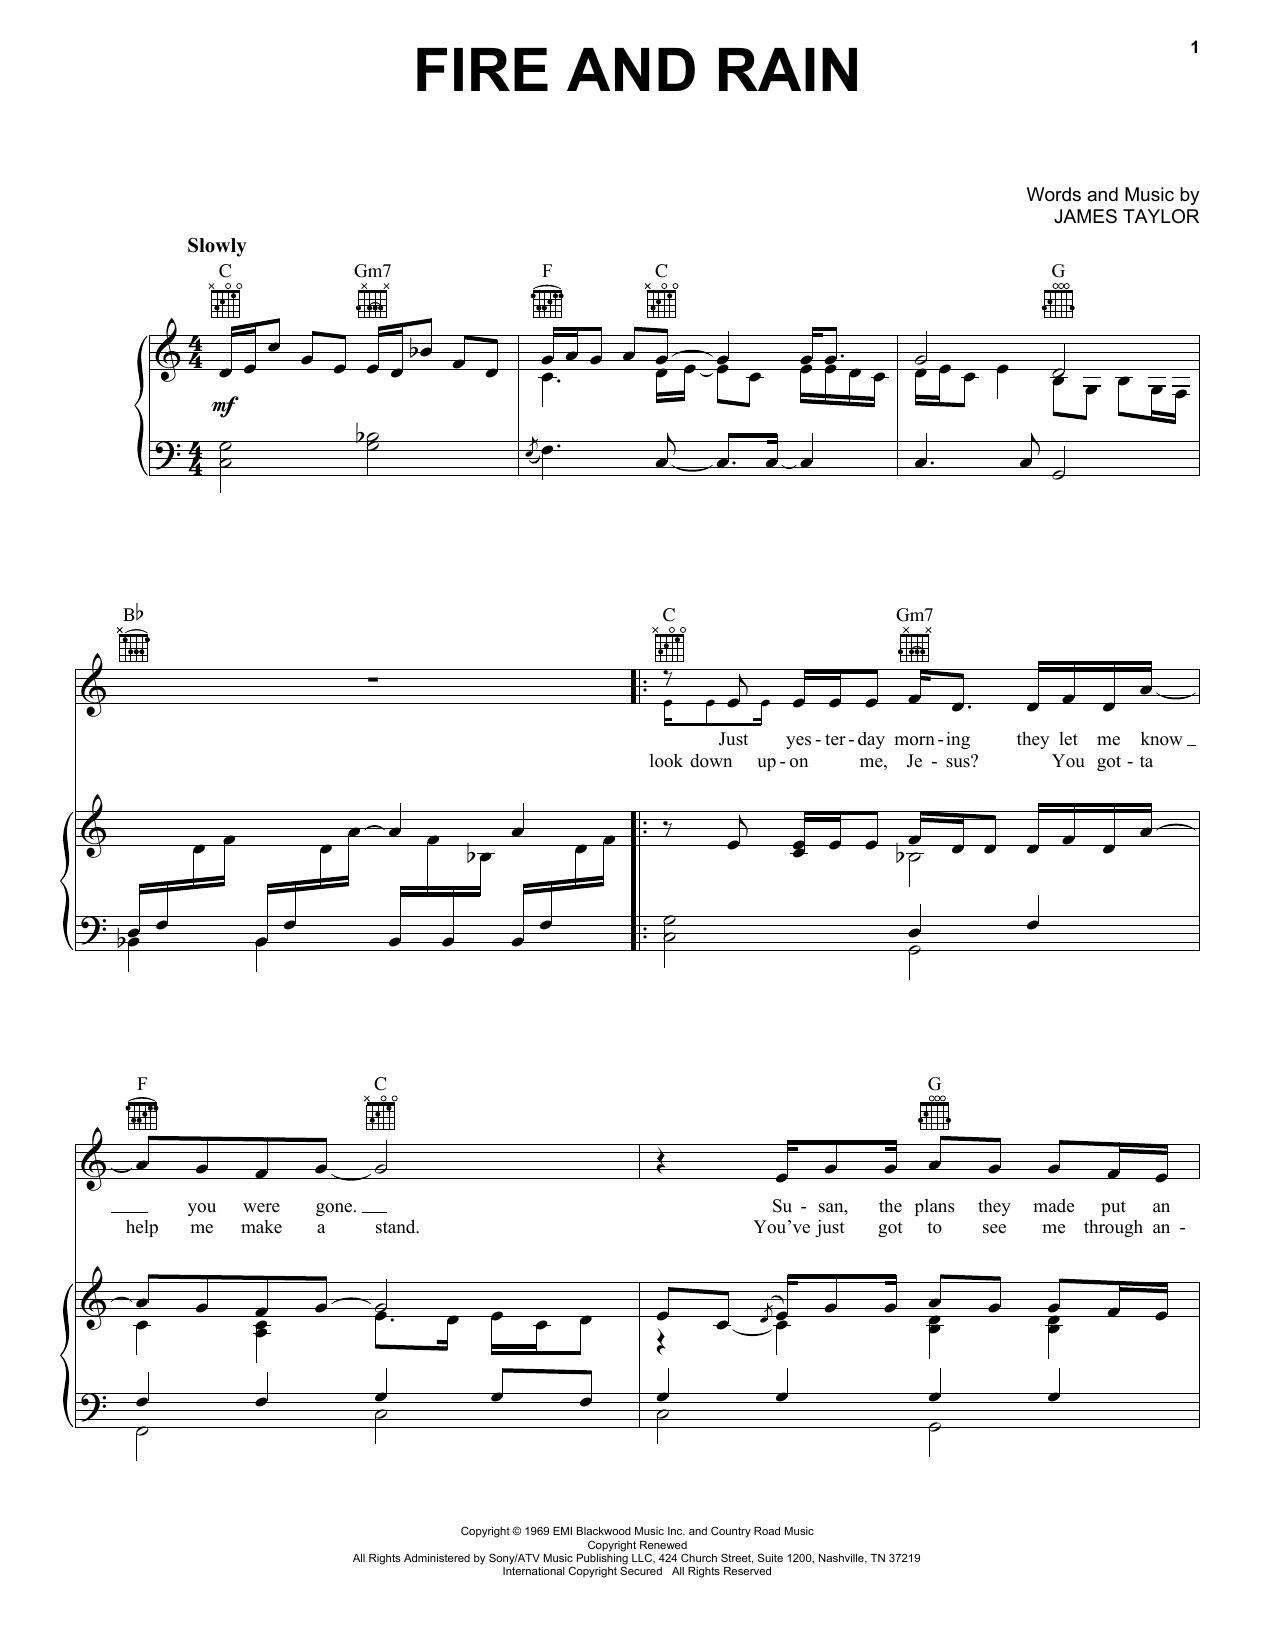 Fire And Rain Chords James Taylor Fire And Rain Sheet Music Notes Chords Download Printable Guitar Lead Sheet Sku 163488